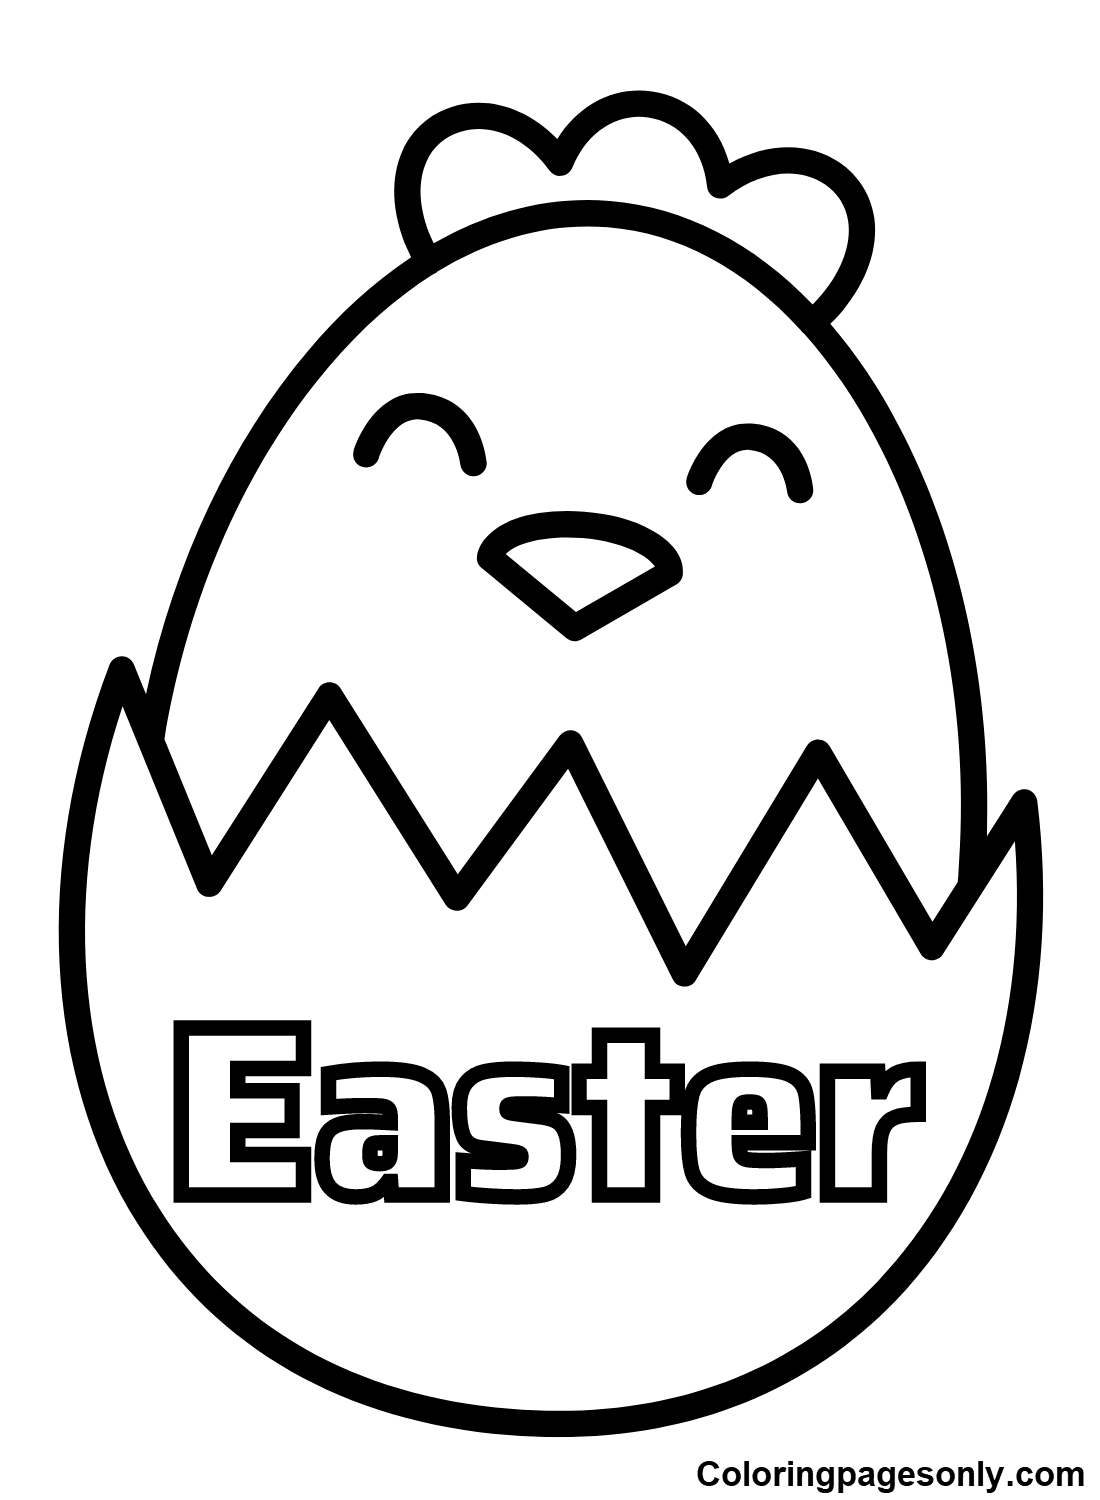 Cute Easter Chick Images Coloring Page